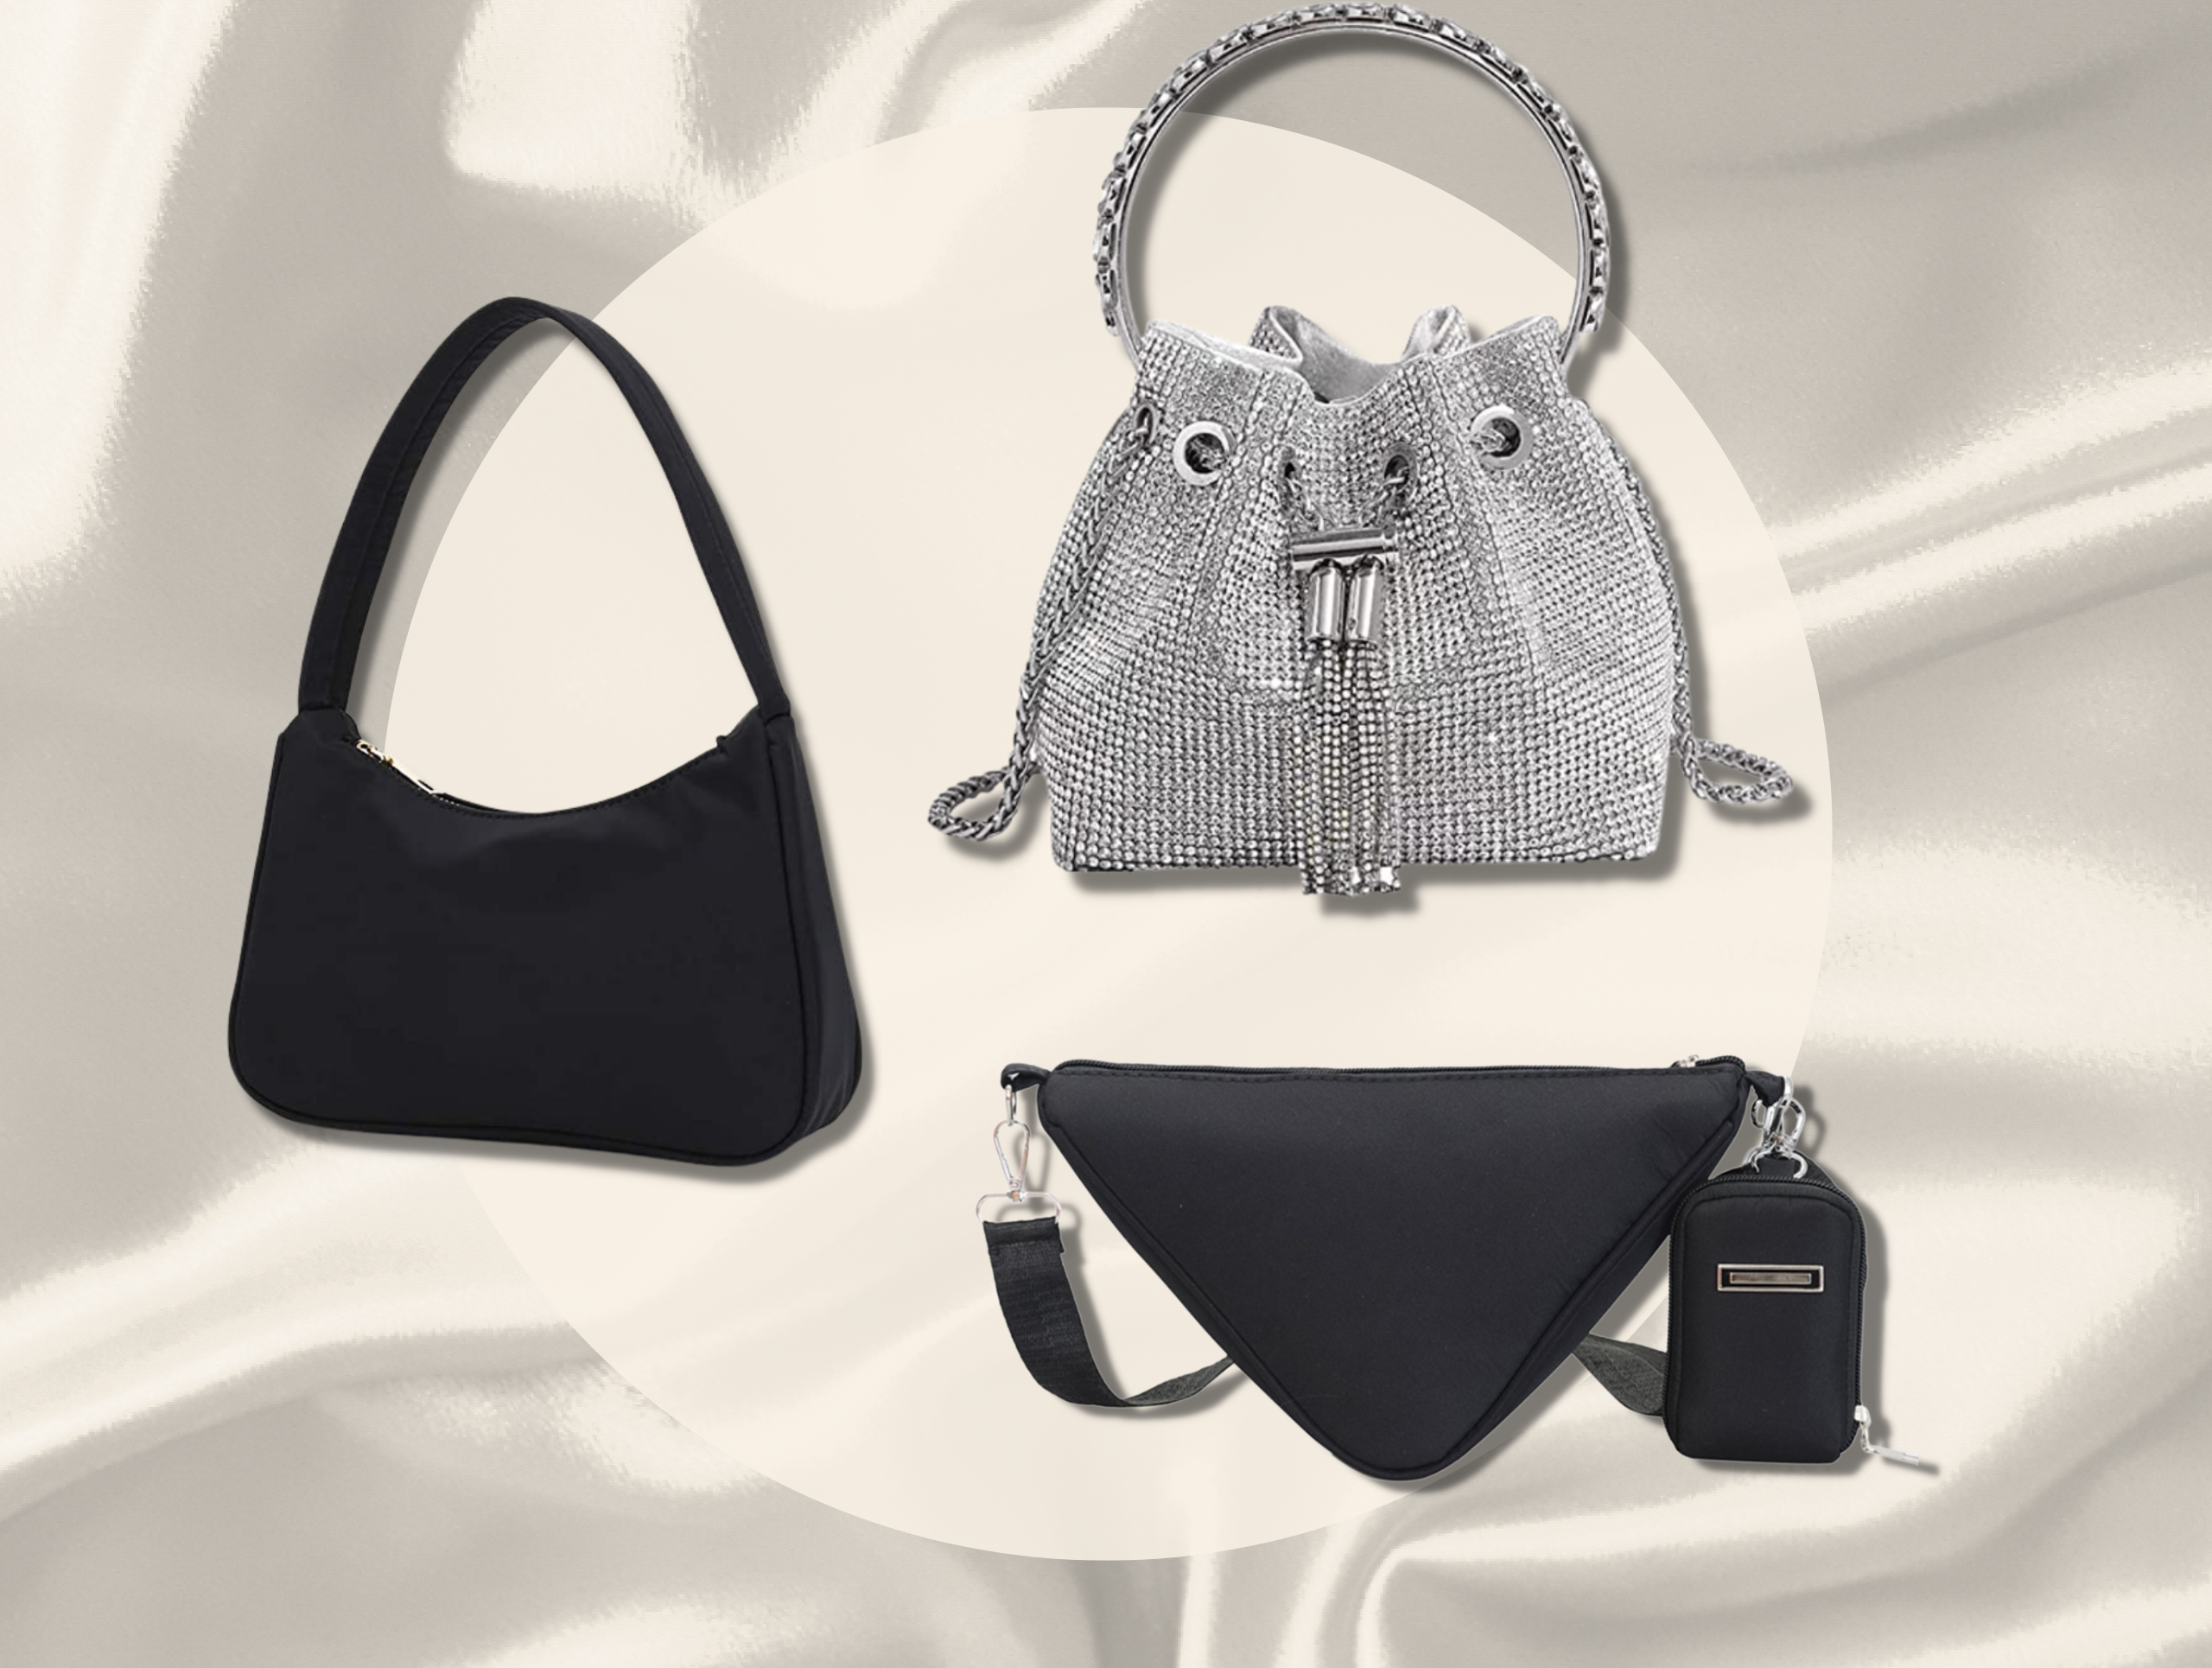 The Best Nylon Handbags and Accessories for That Y2K Look